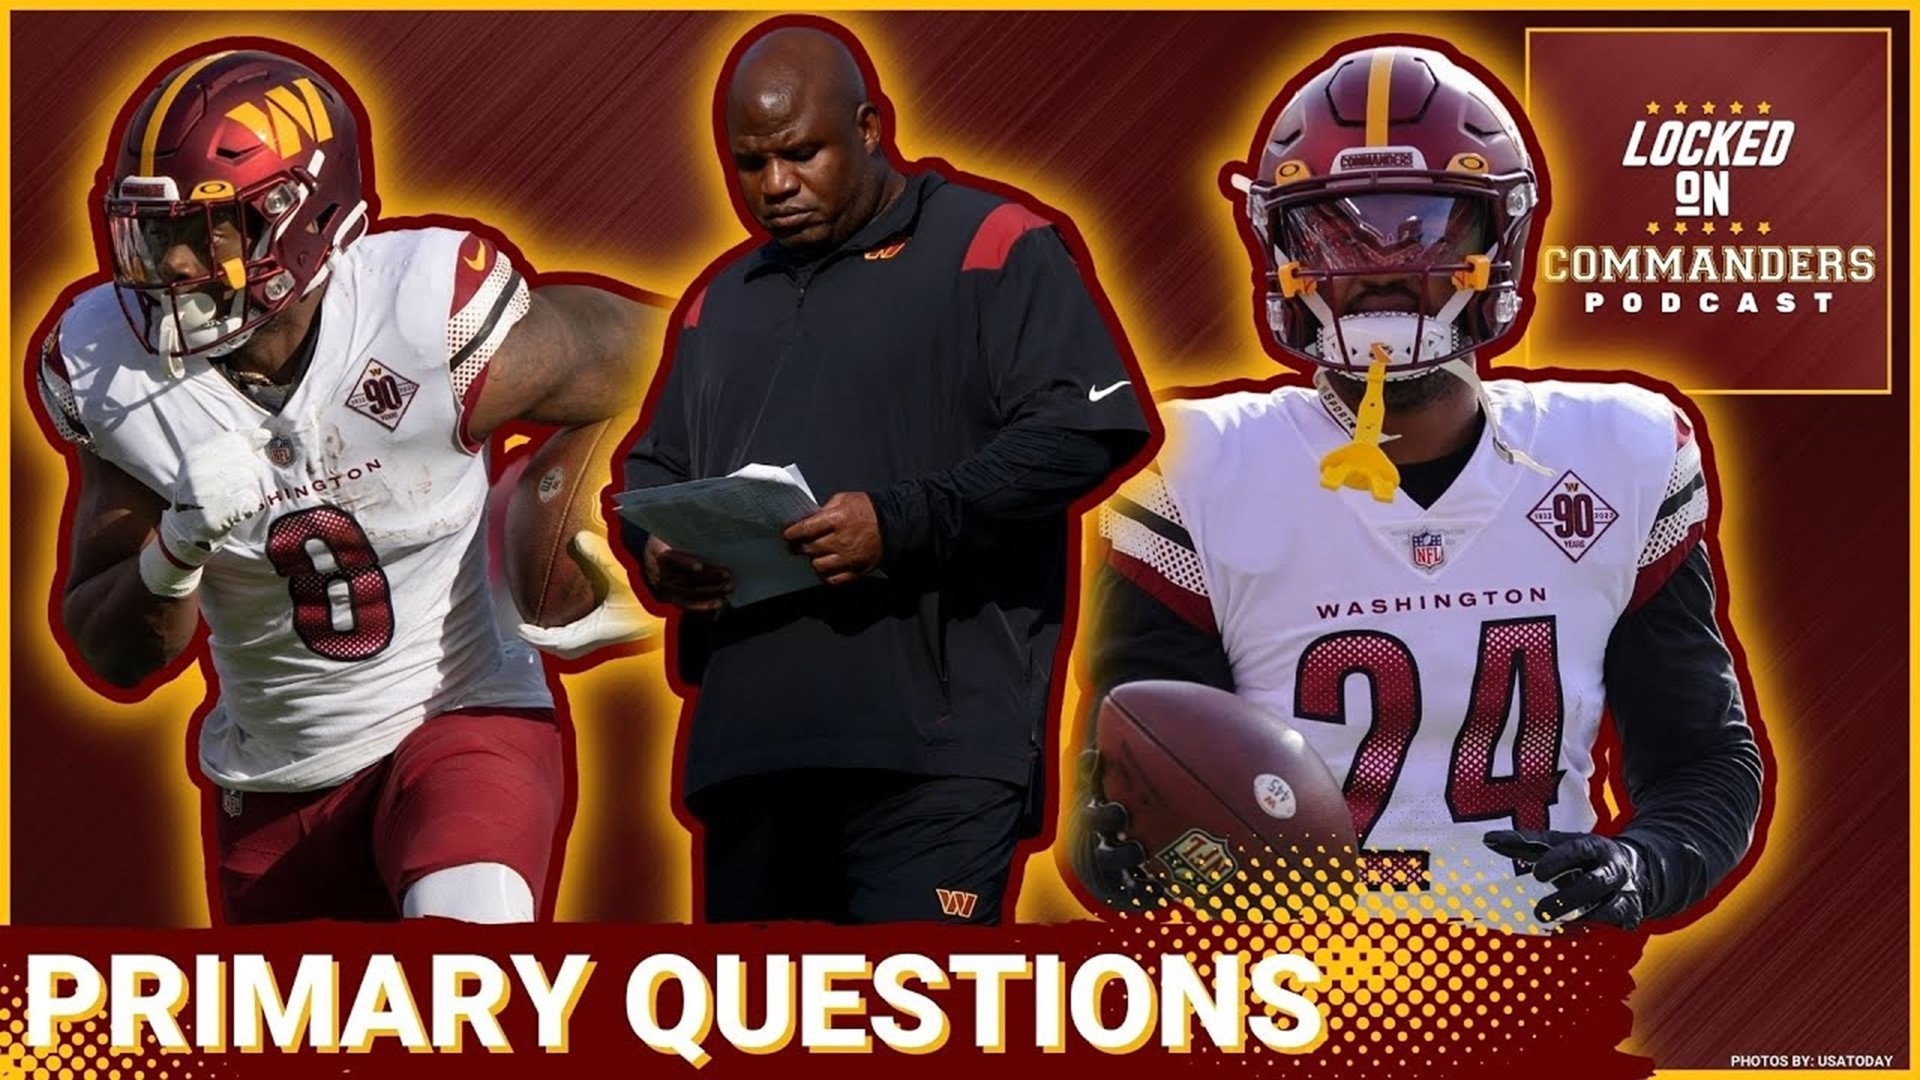 Washington Commanders mailbag this week contained questions regarding offensive shifts by Eric Bieniemy to Brian Robinson over Antonio Gibson.